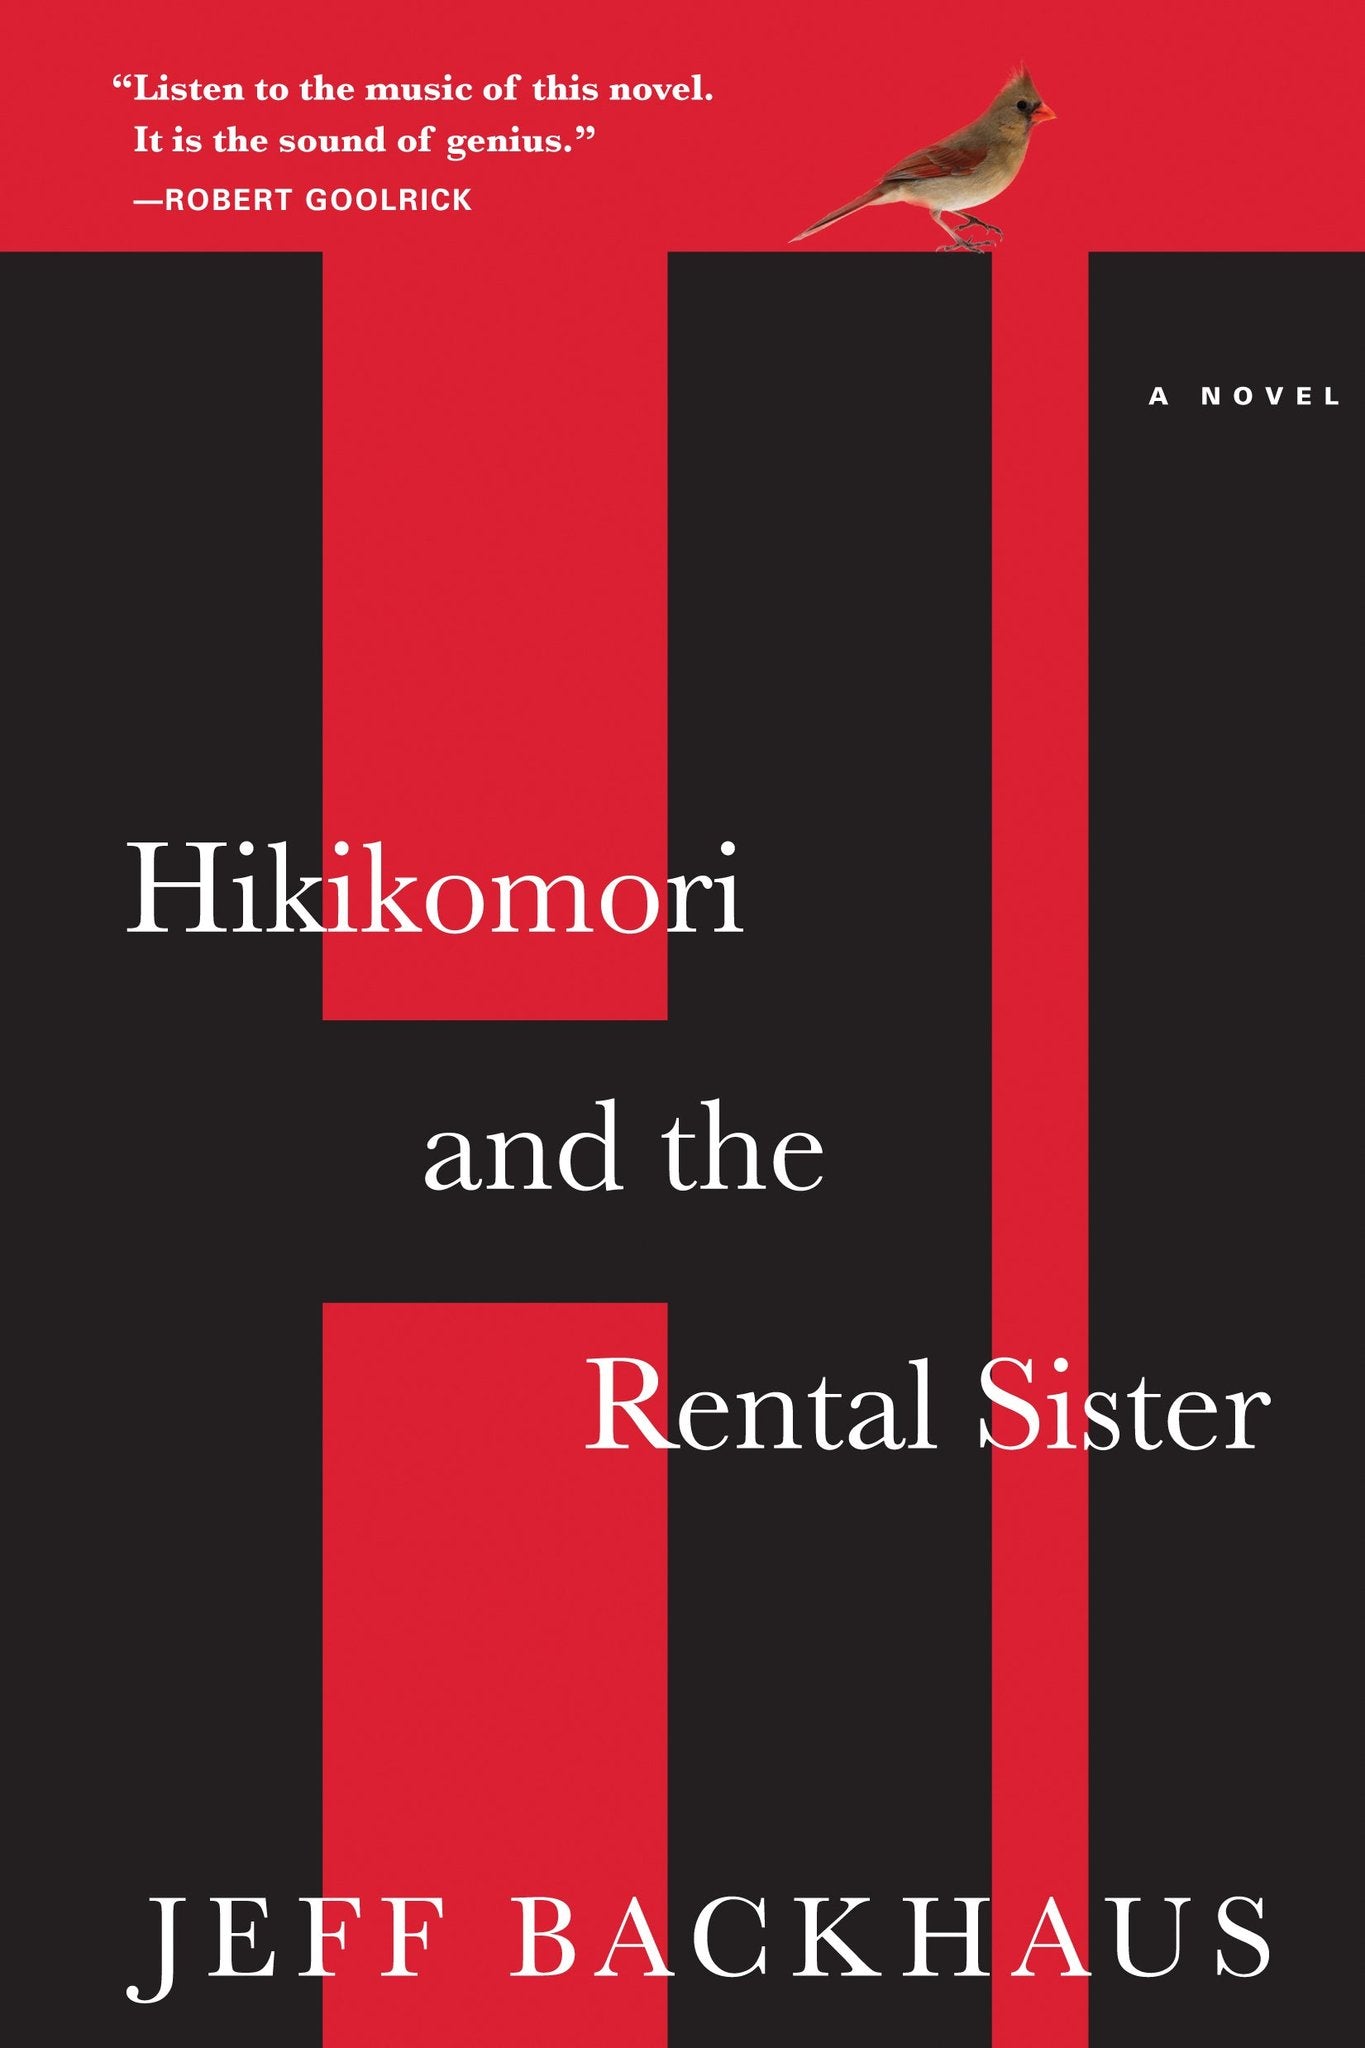 Hikikomori and the Rental Sister by Jeff Backhaus (Uncorrected Proof)